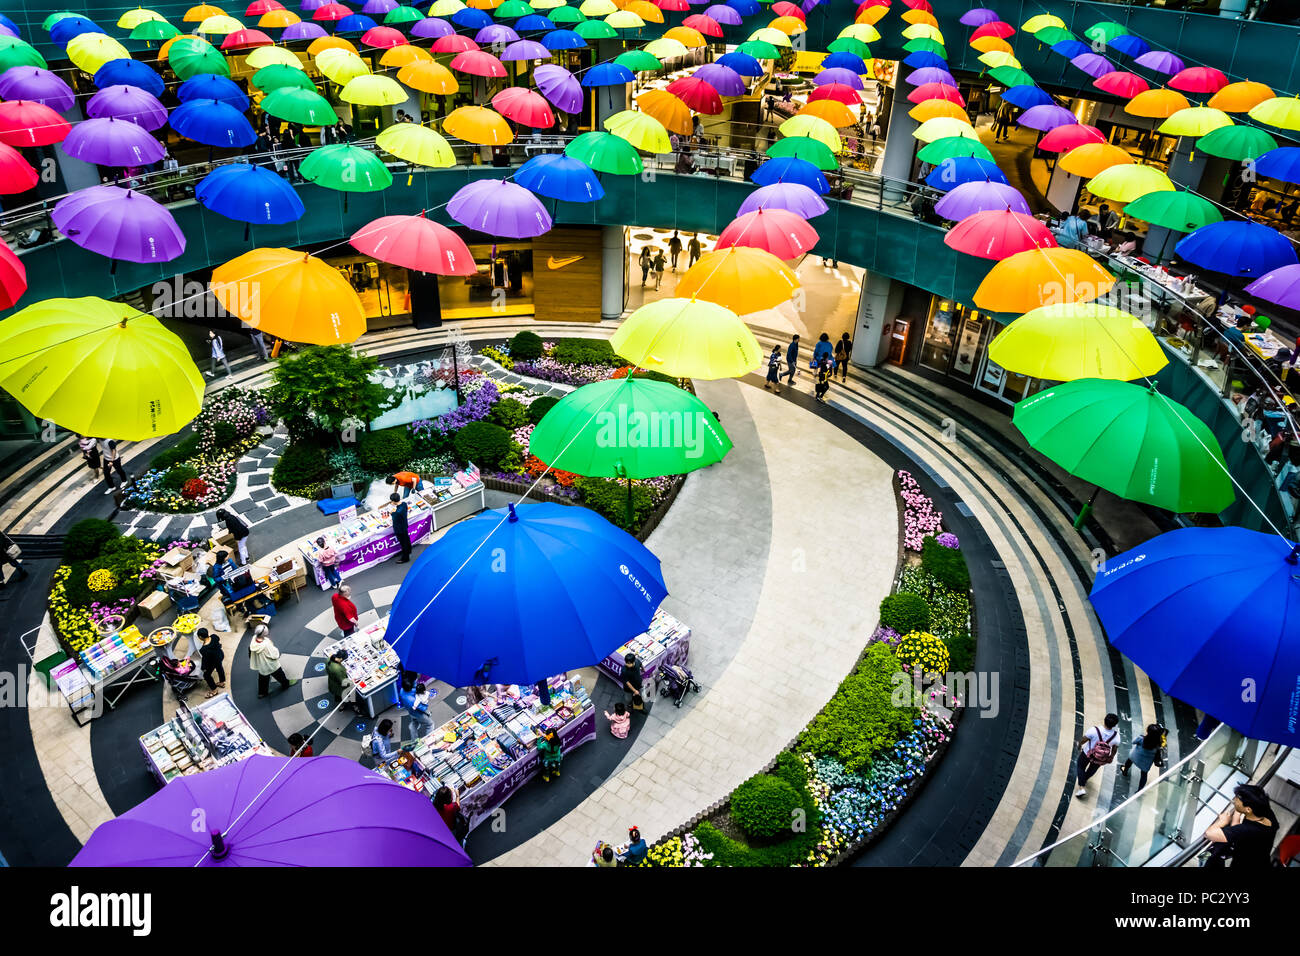 Seoul, South Korea - May 14, 2017: Mecenatpolis mall in Hapjeong have wave  lines not just square inside the building. Colorful umbrellas decoration ma  Stock Photo - Alamy